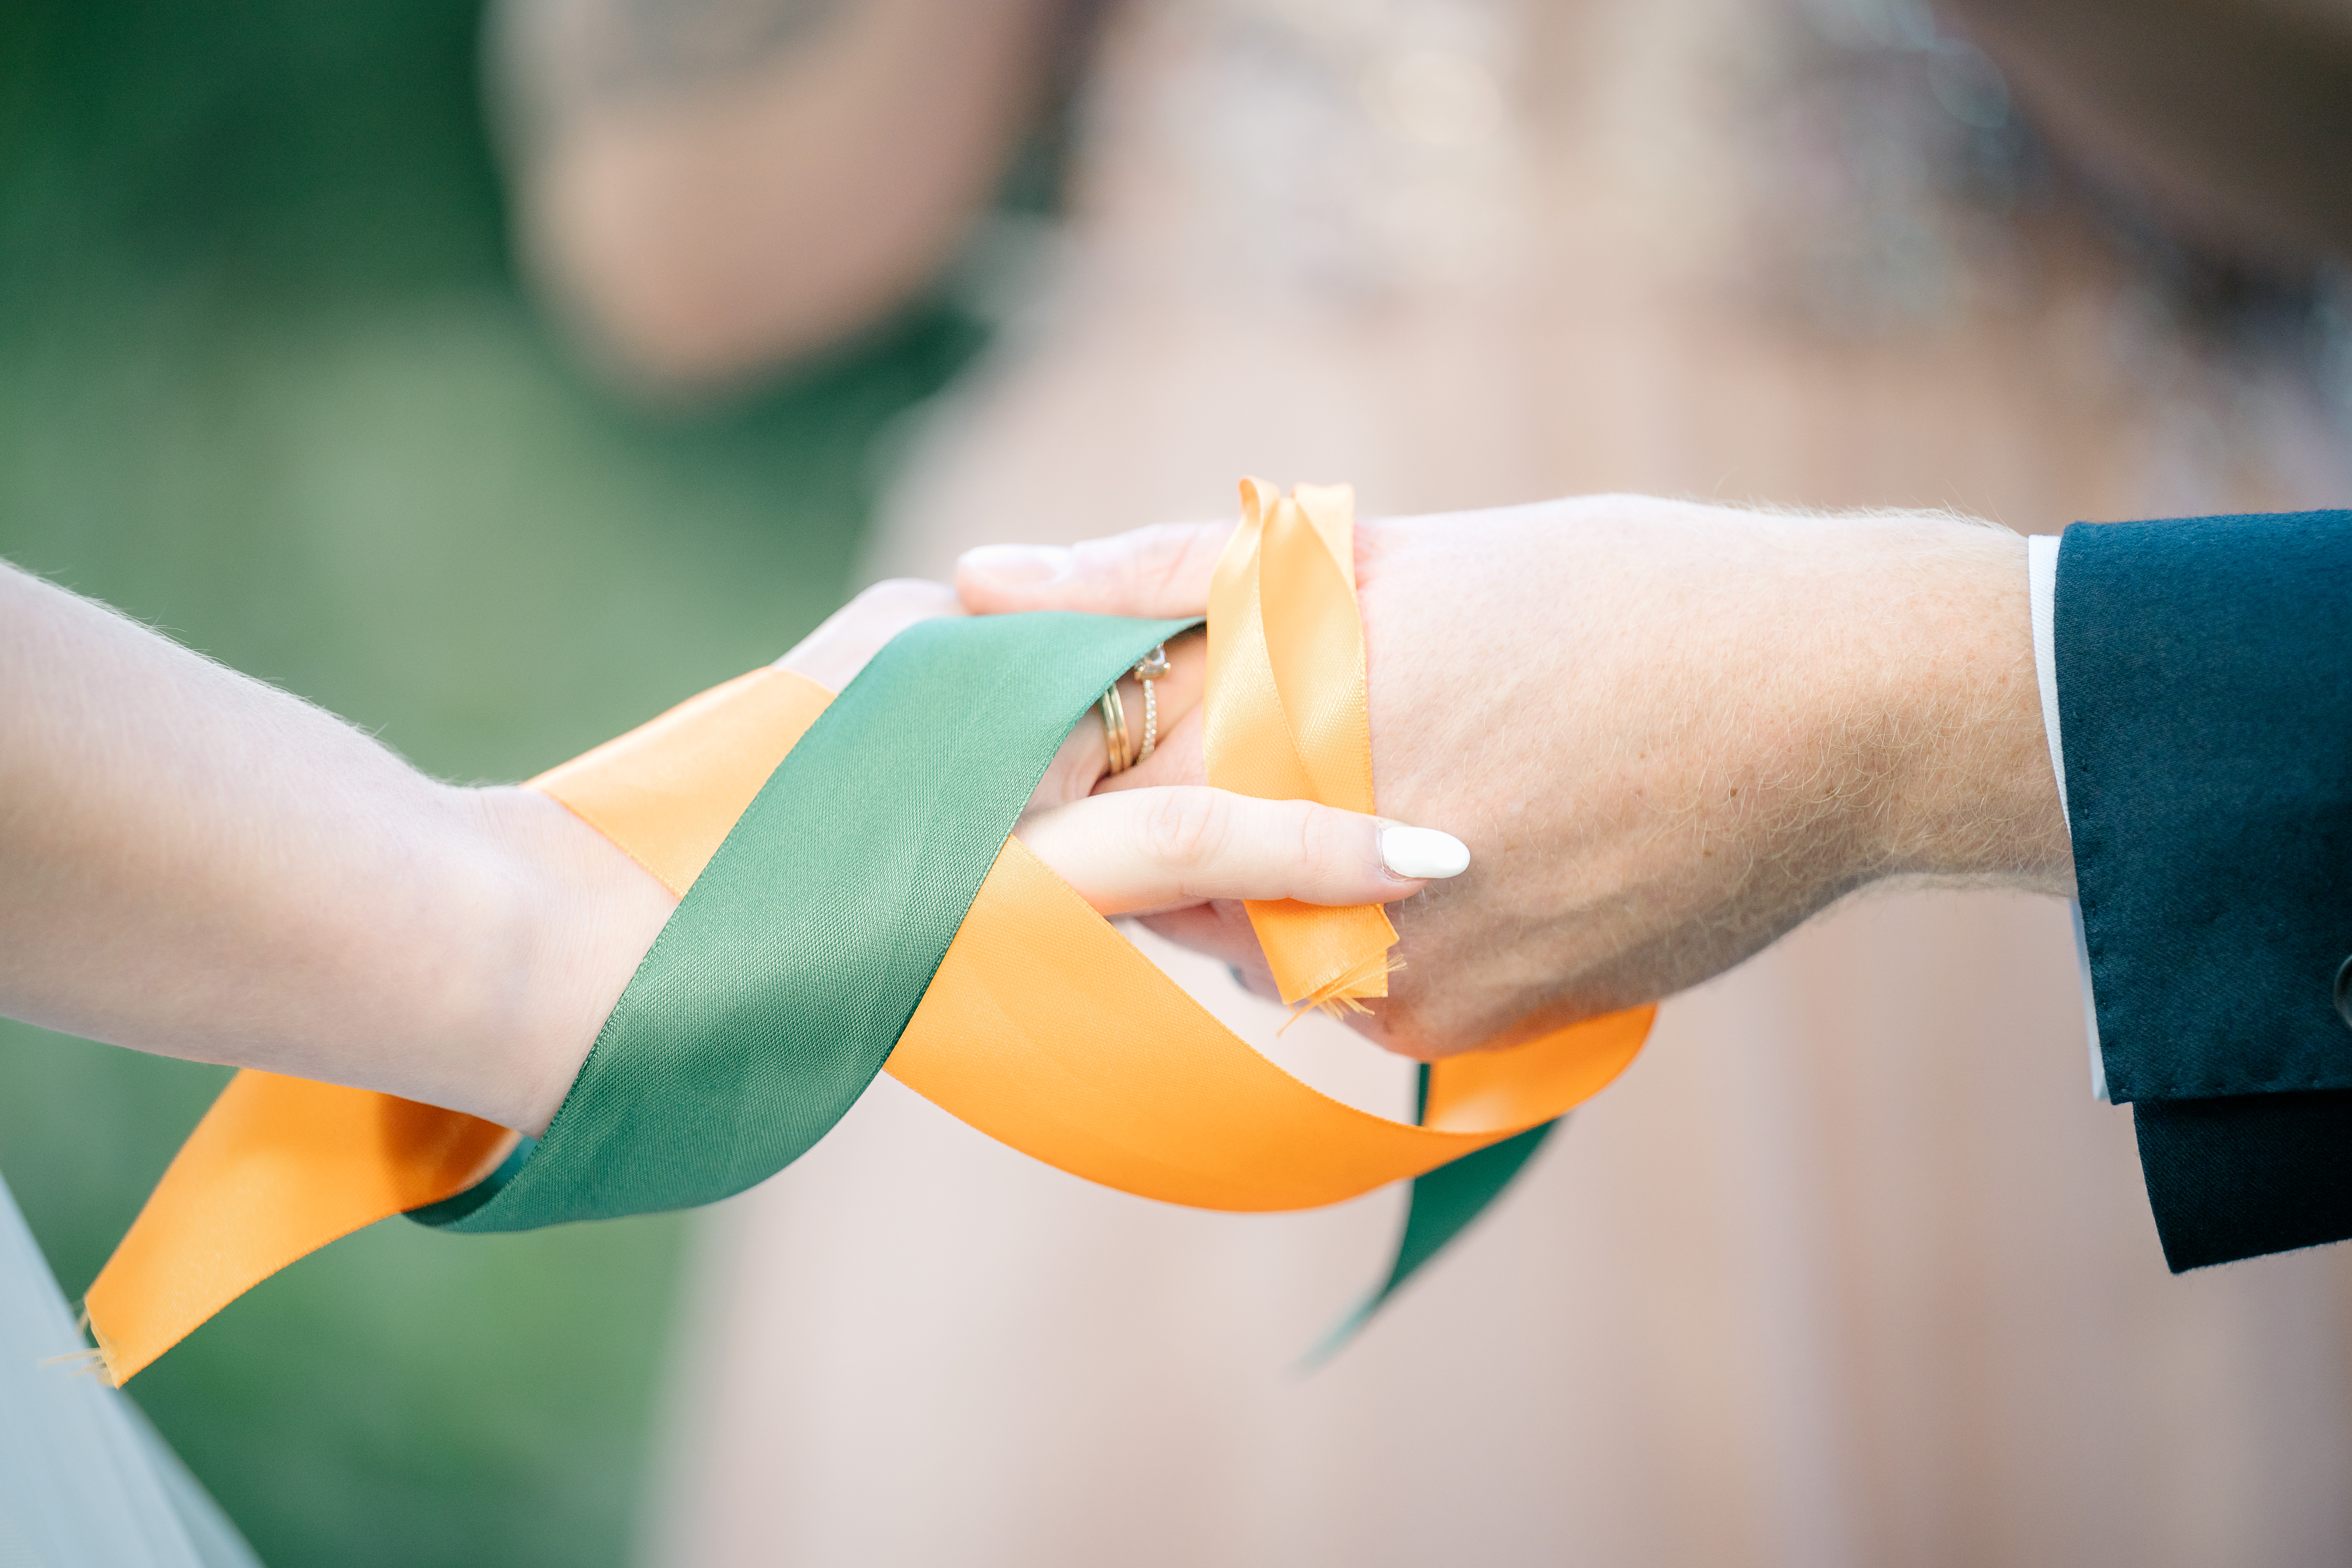 close up of hand tying ceremony with orange and green ribbons wrapping the hands of the bride and groom